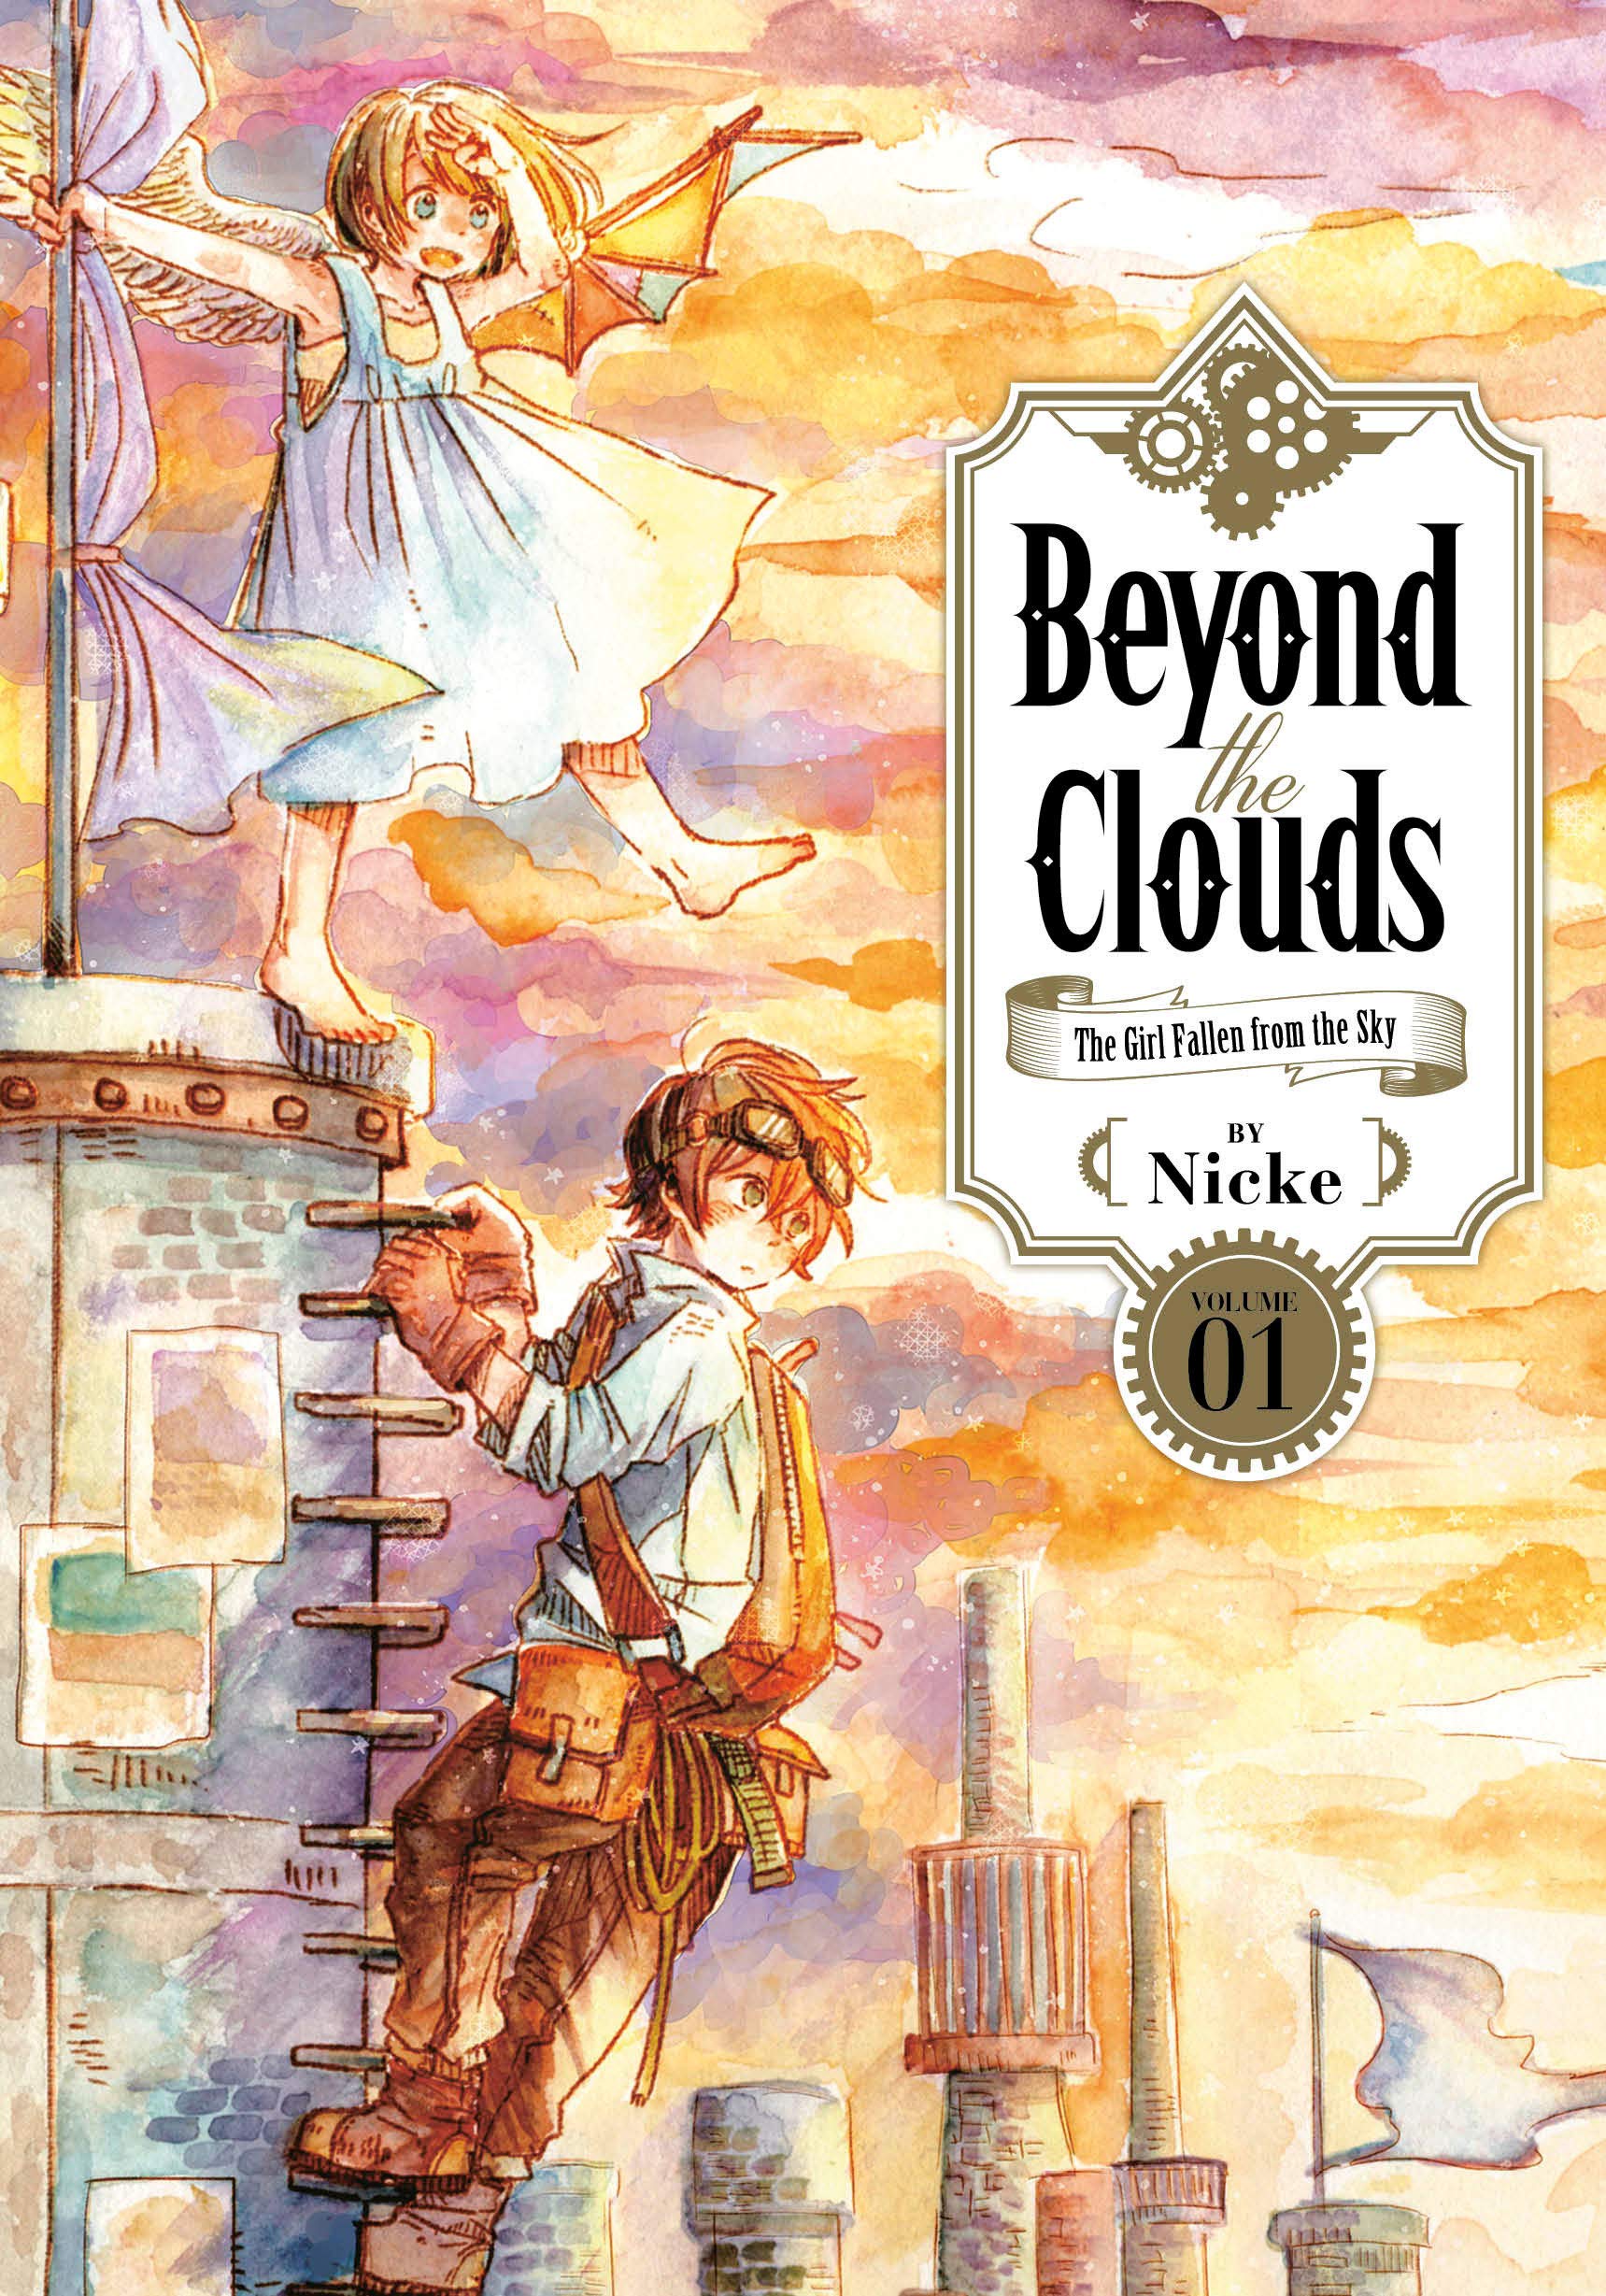 Beyond the Clouds Vol. 01